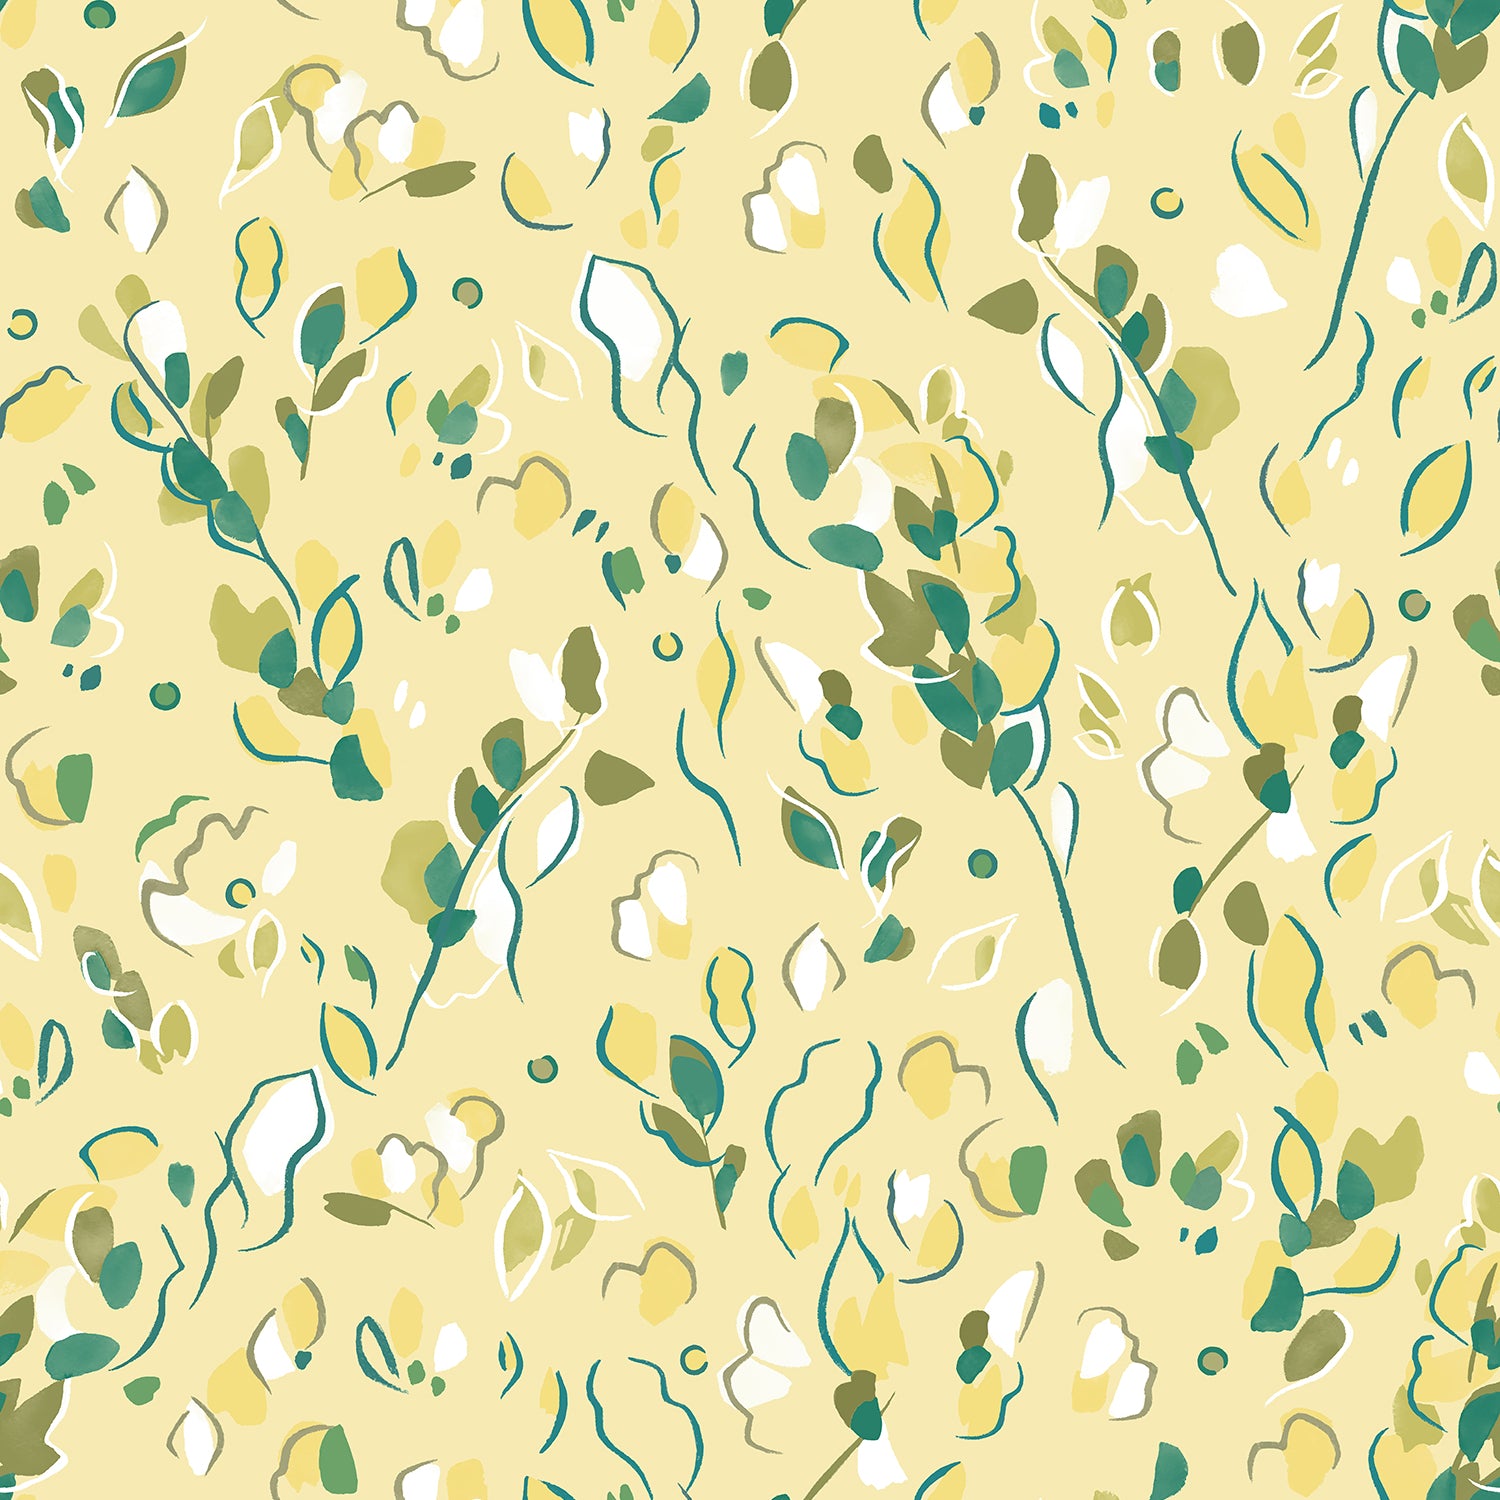 Detail of wallpaper in a painterly leaf print in shades of green and white on a yellow field.